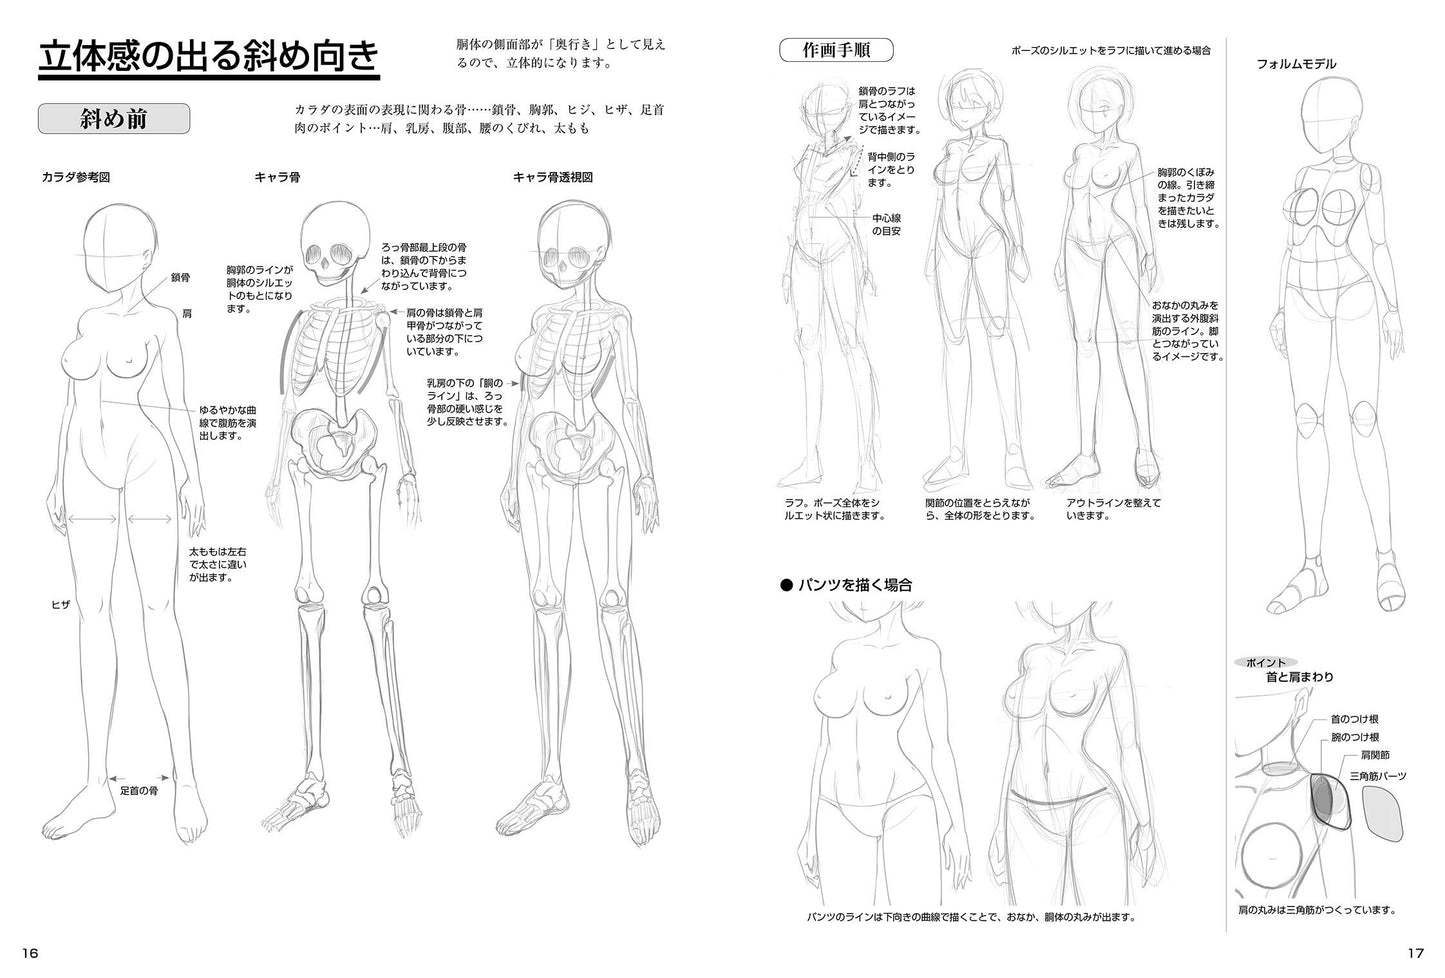 How To Draw a Girl's Body, Draw a Sexy Girl by Grasping The Skeleton and Fleshy